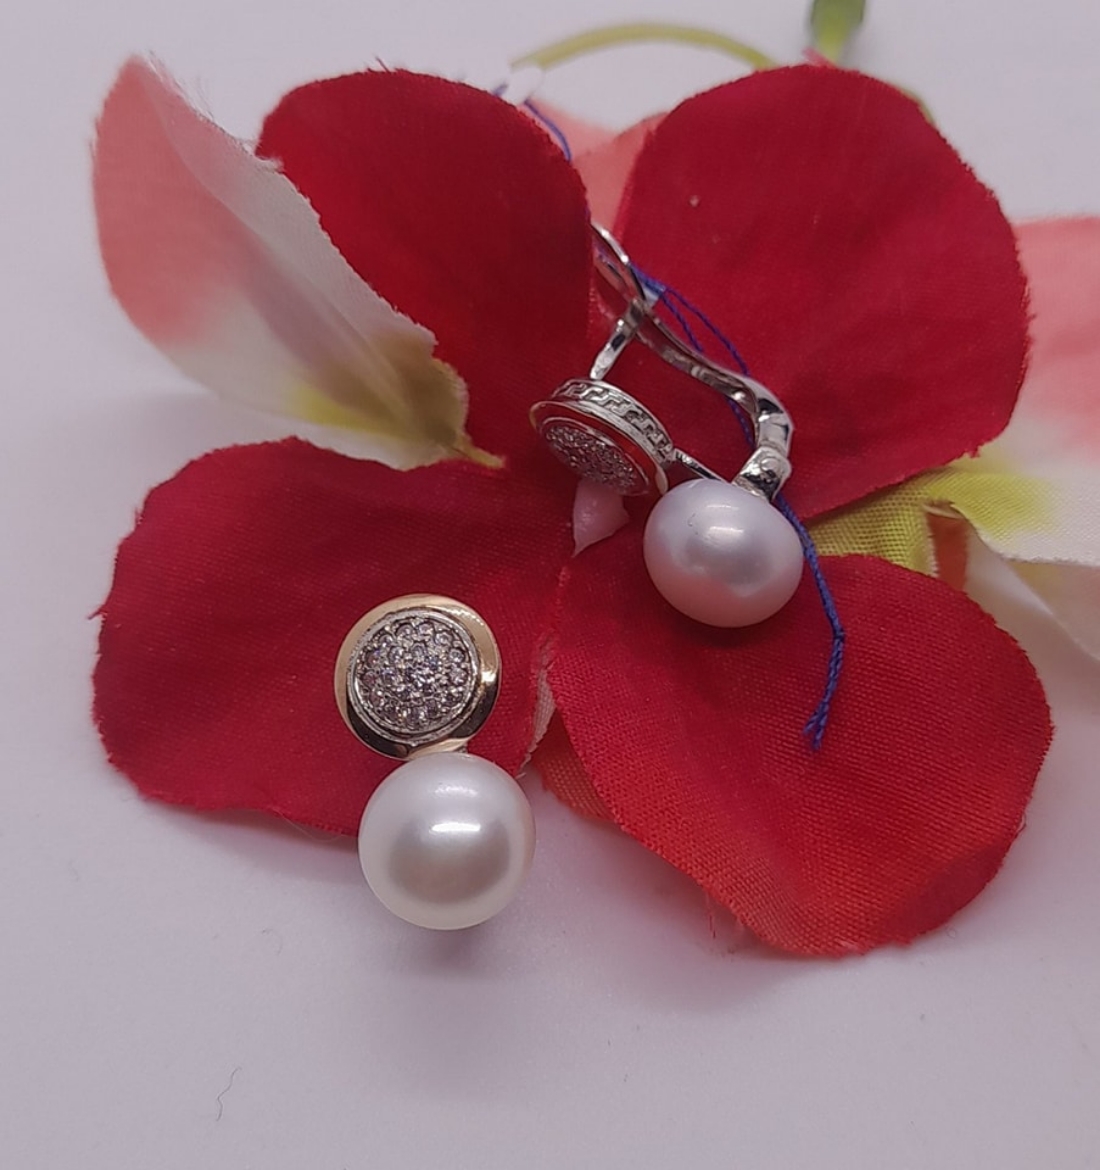 Picture of Silver Earrings